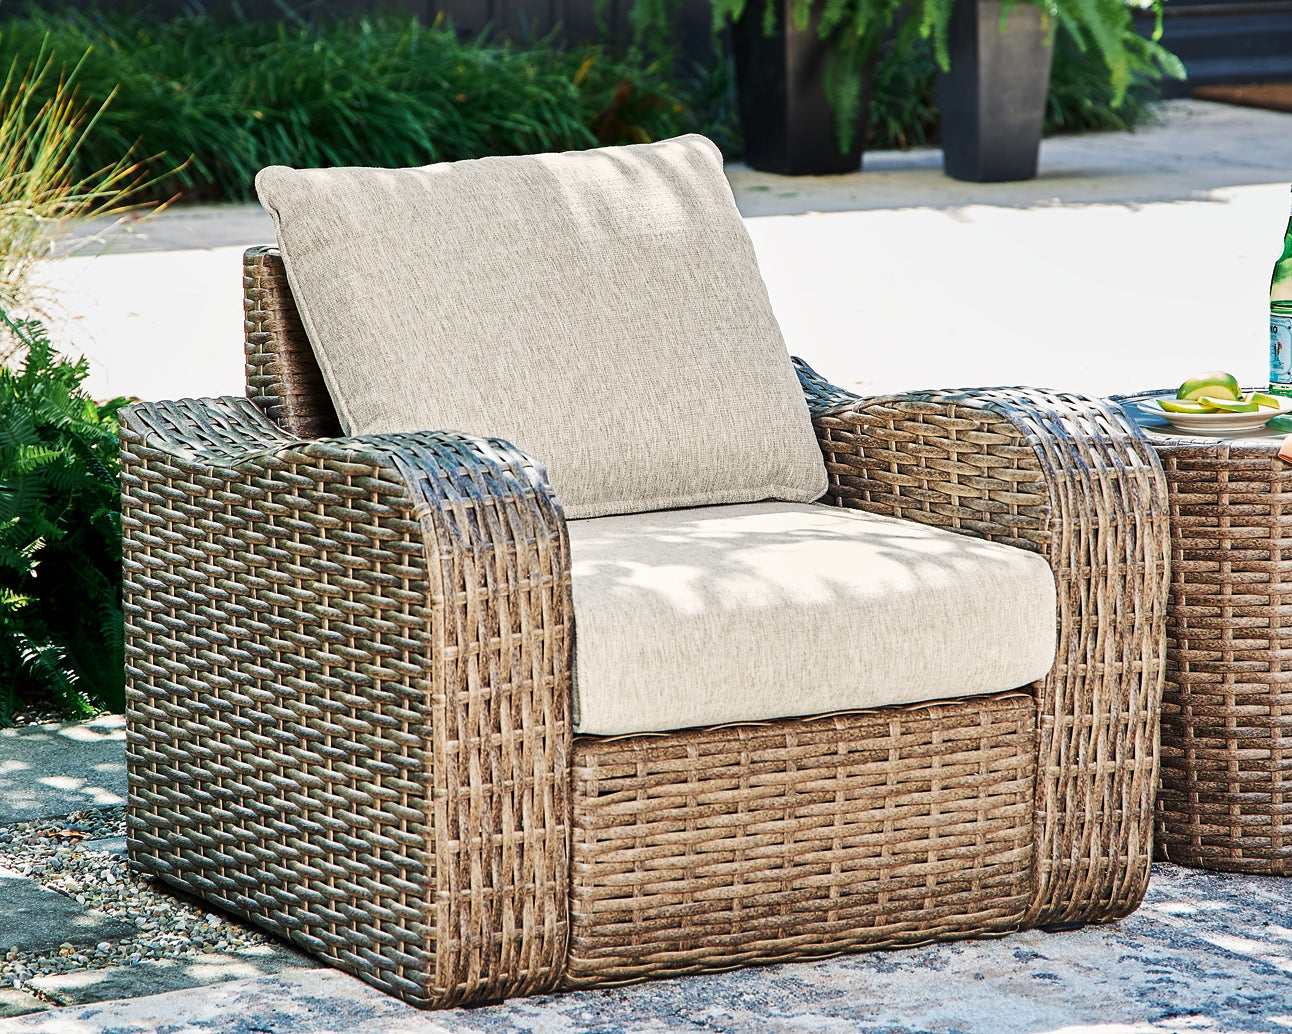 Ashley Express - Sandy Bloom Outdoor Lounge Chair and Ottoman